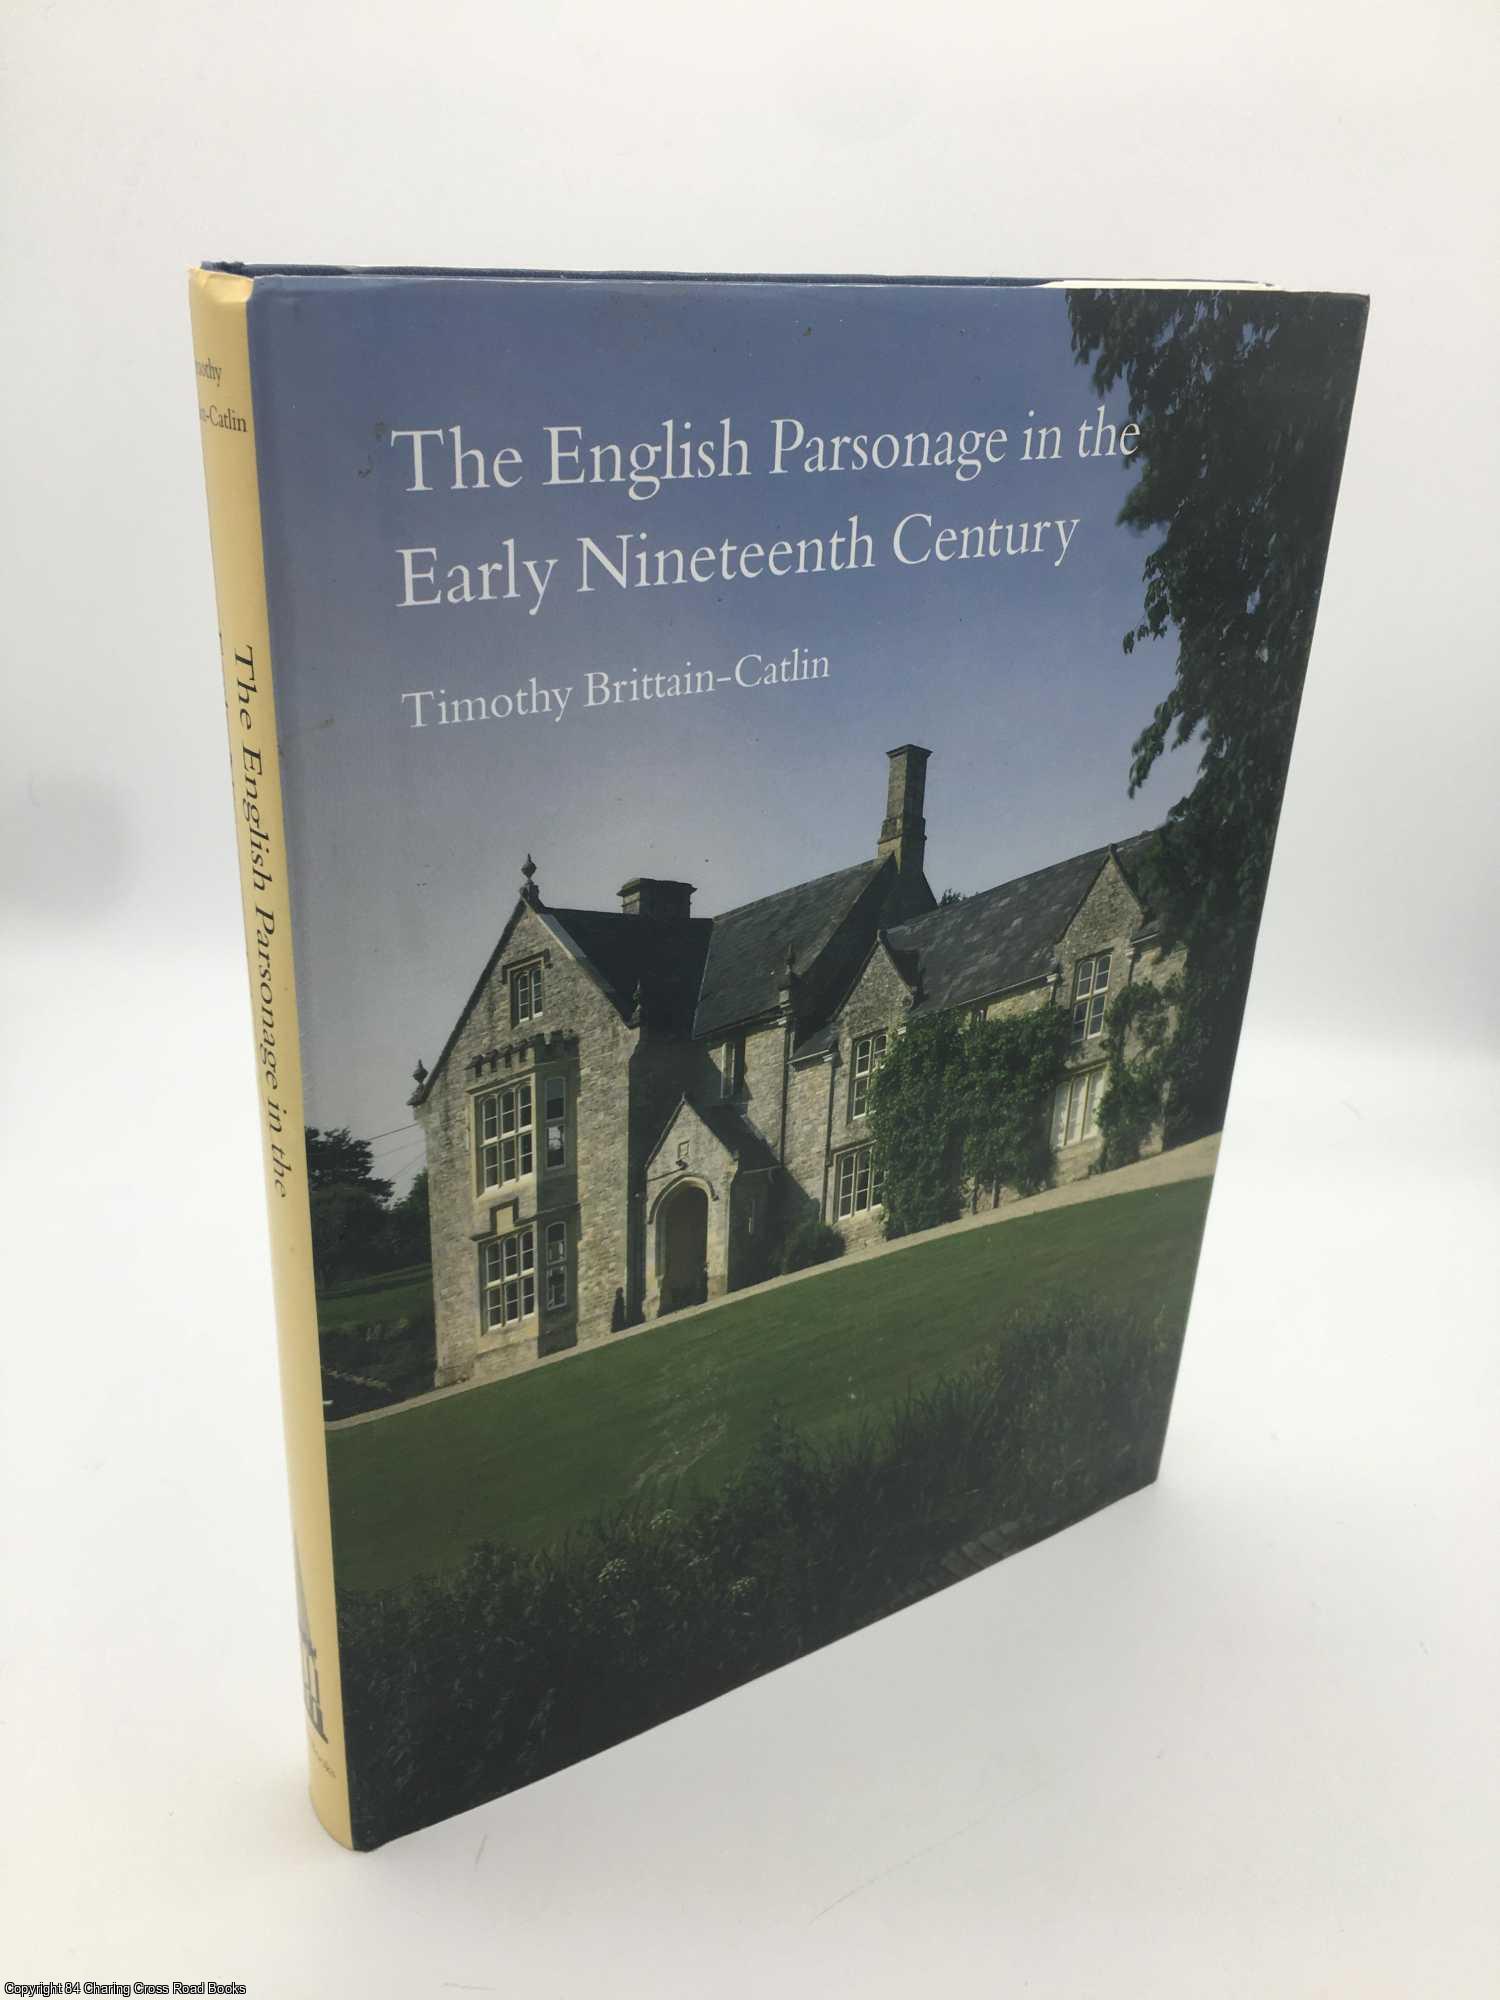 Brittain-Catlin, Timothy - The English Parsonage in the Early Nineteenth Century